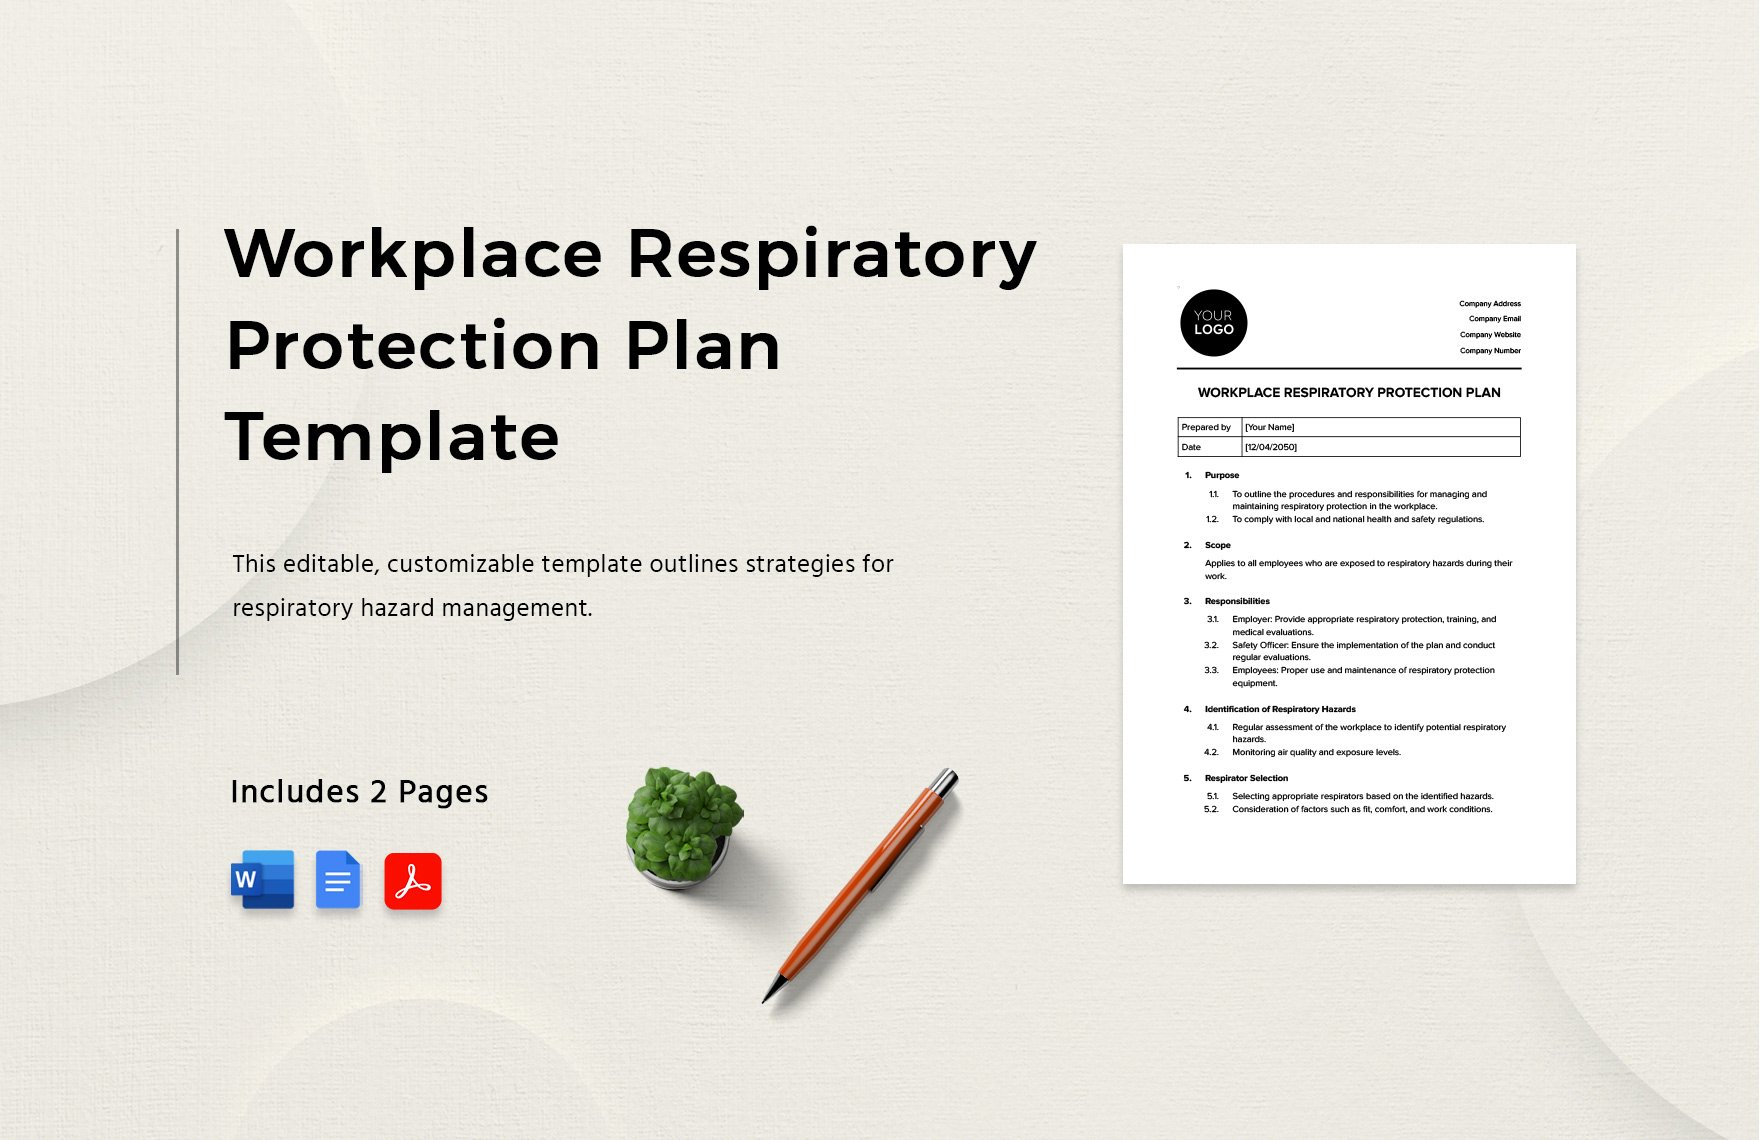 Workplace Respiratory Protection Plan Template